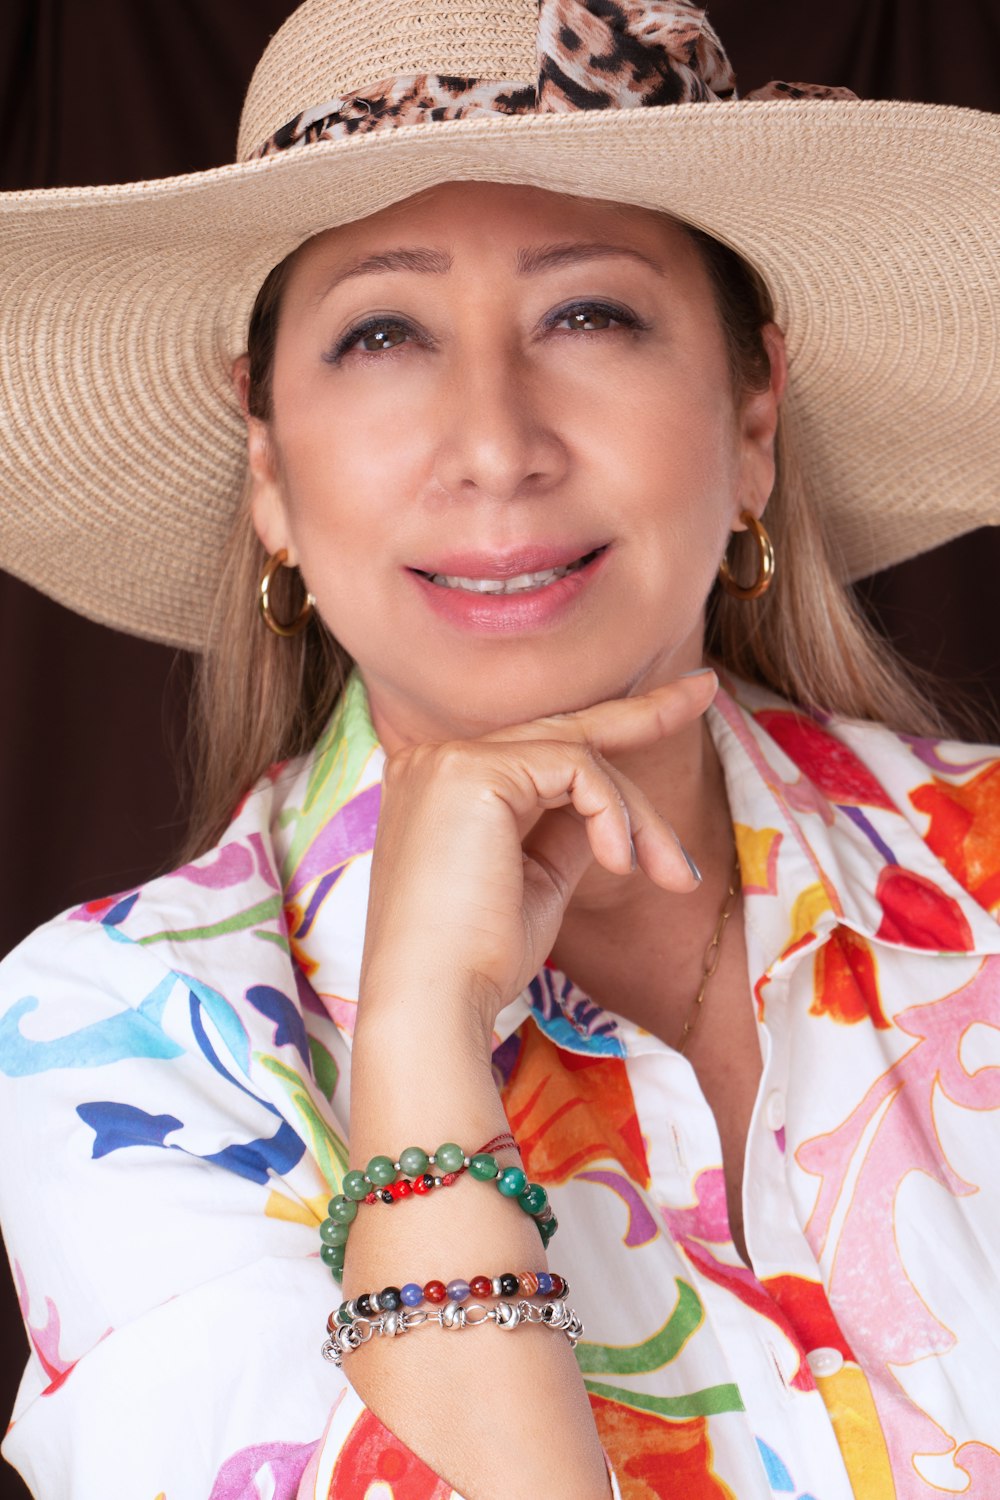 a woman wearing a hat and a colorful shirt